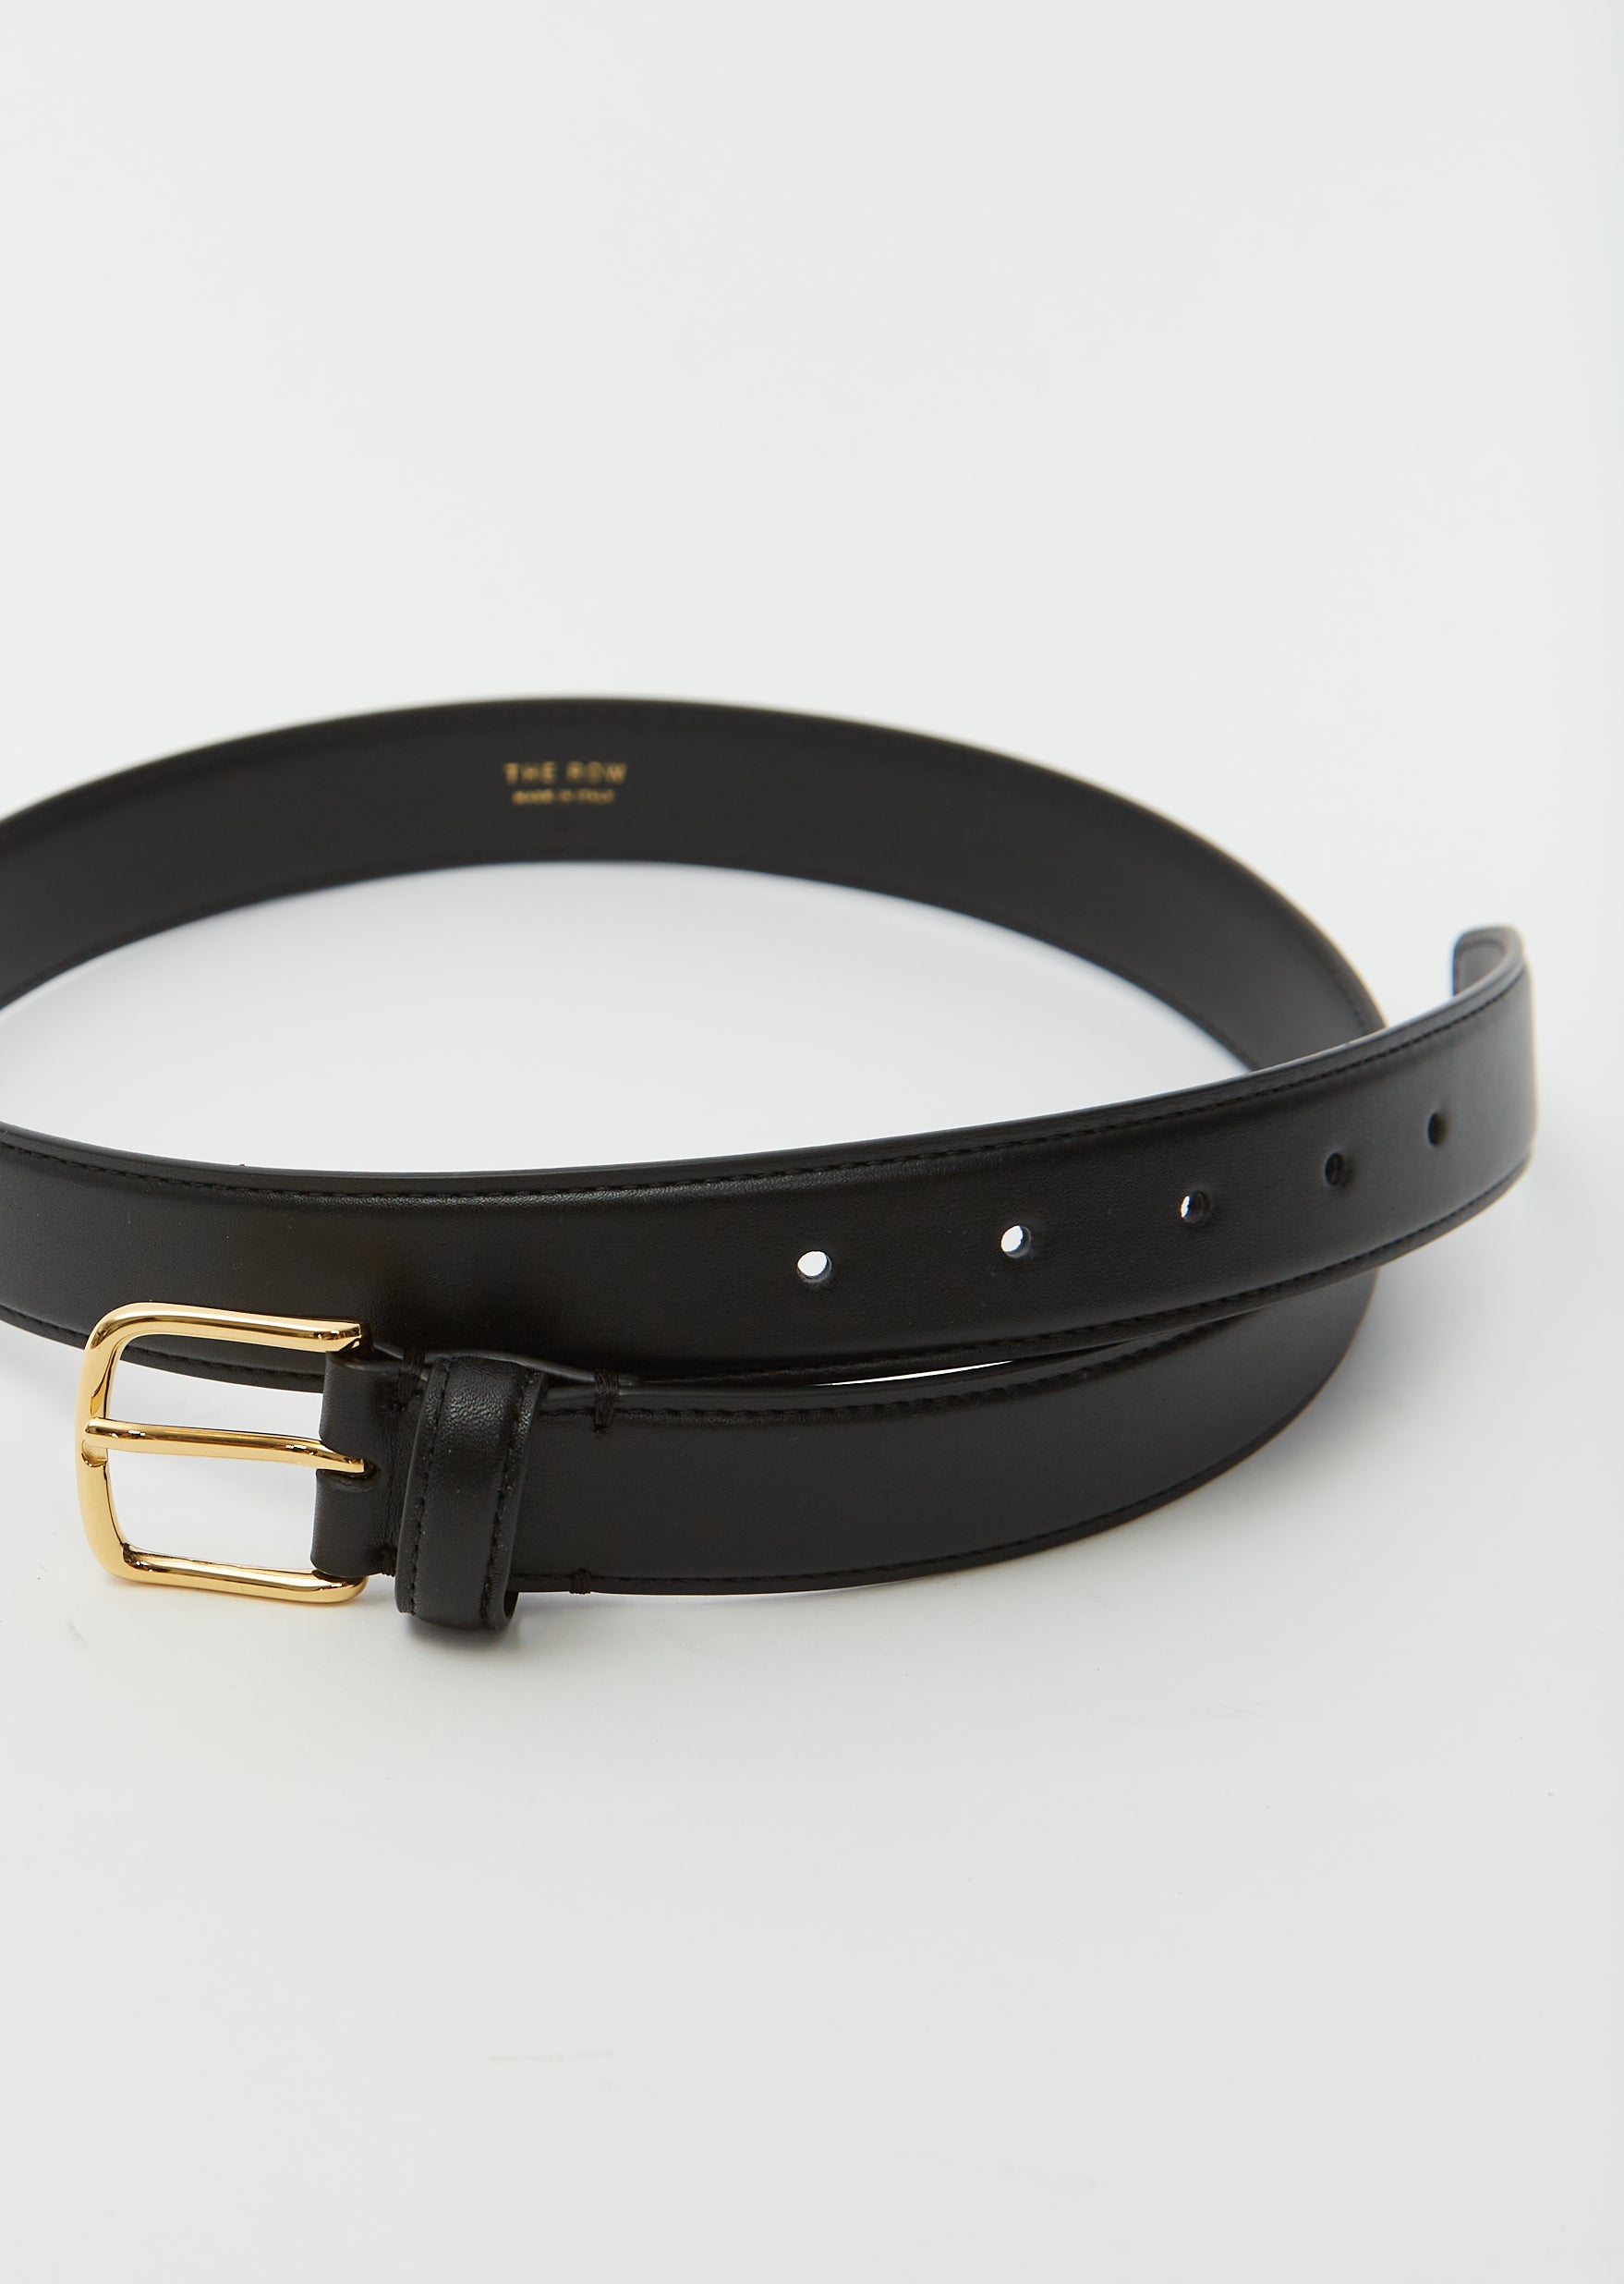 THE ROW Classic Leather Belt Black S